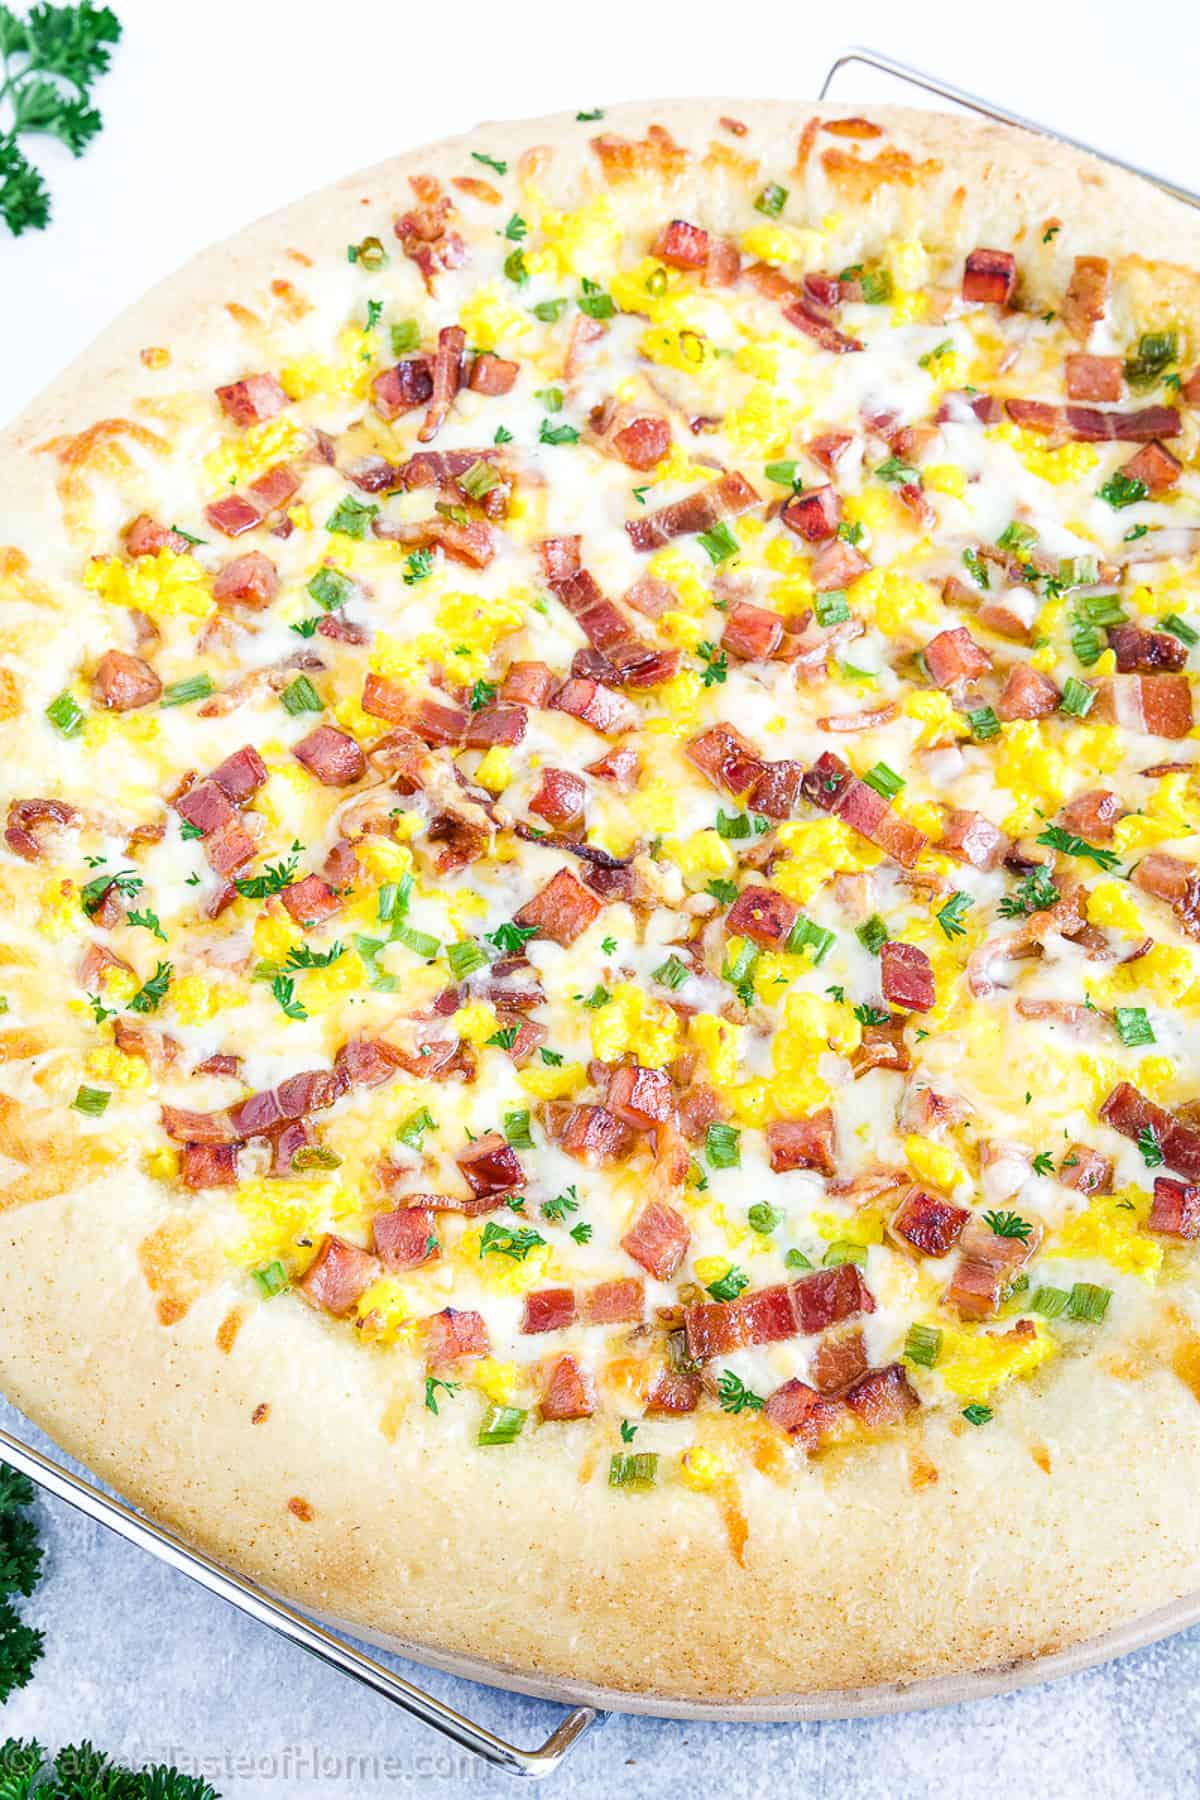 This recipes combines everything you love about bacon, ham, and egg with the flavors of pizza for the most delicious combo ever!